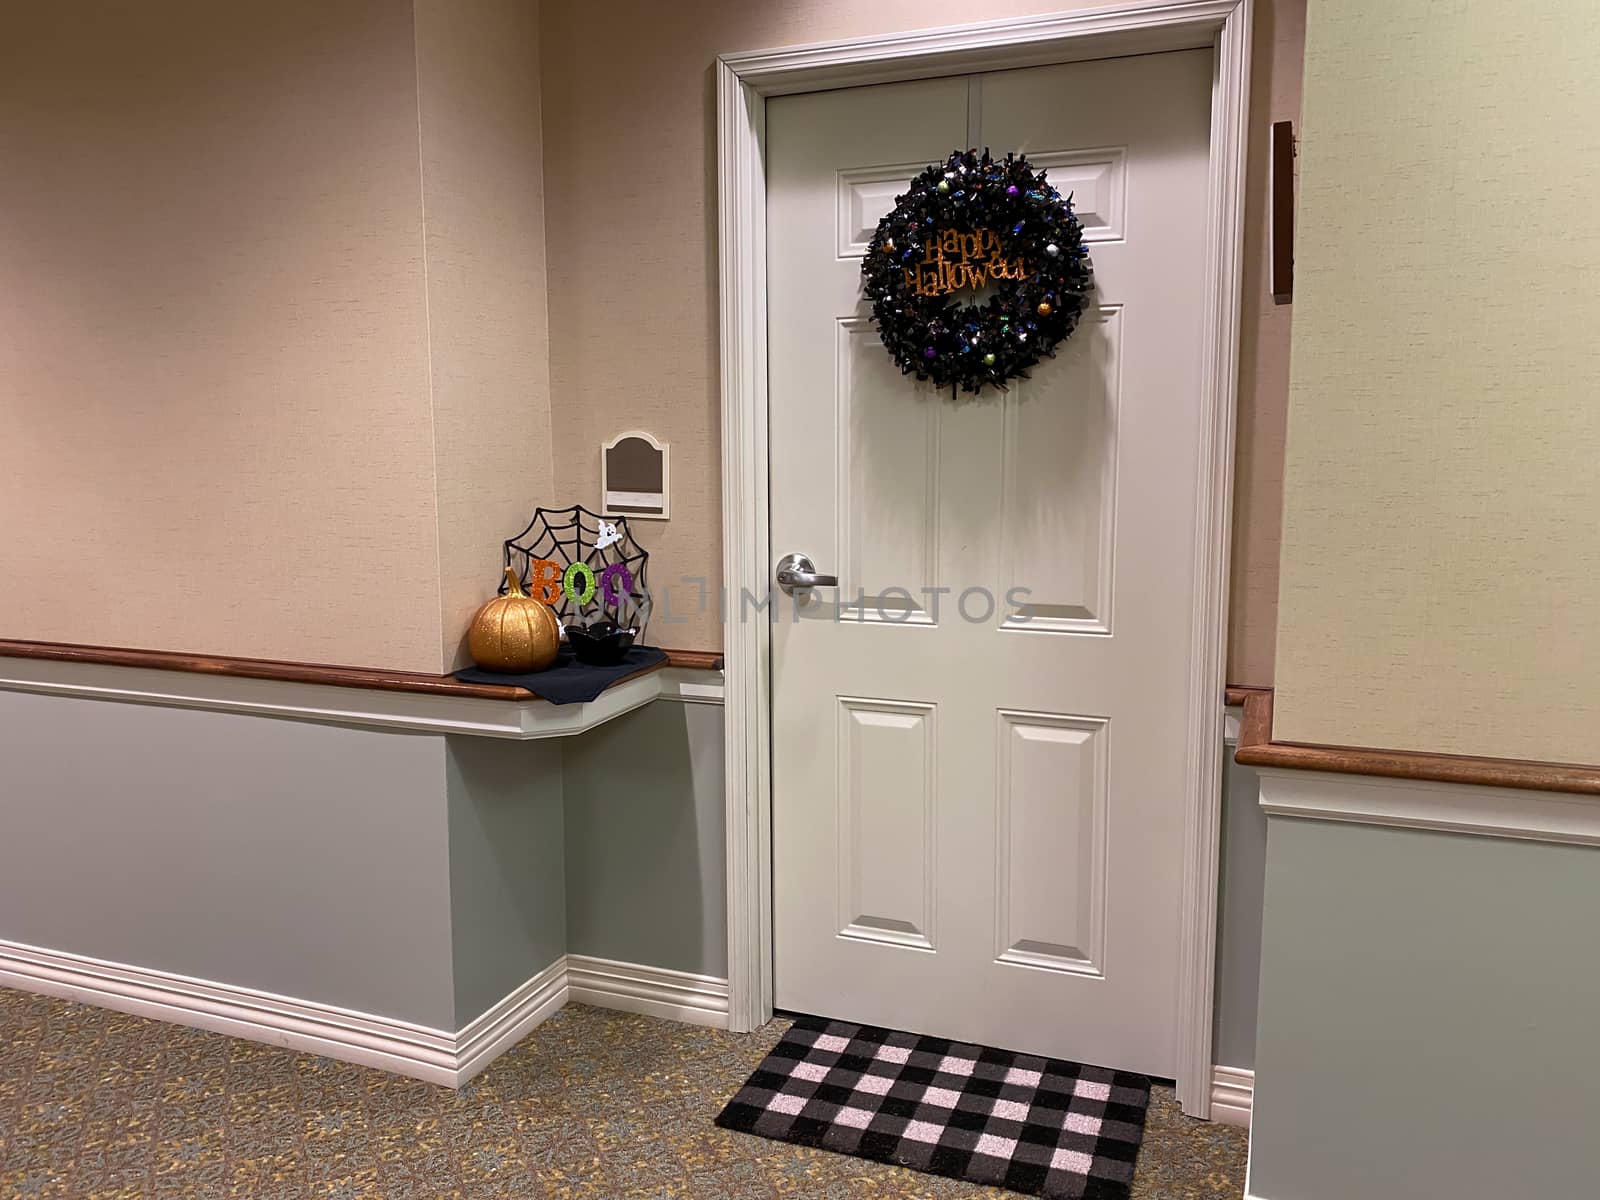 A door at a senior living facility decorated for halloween. by Jshanebutt